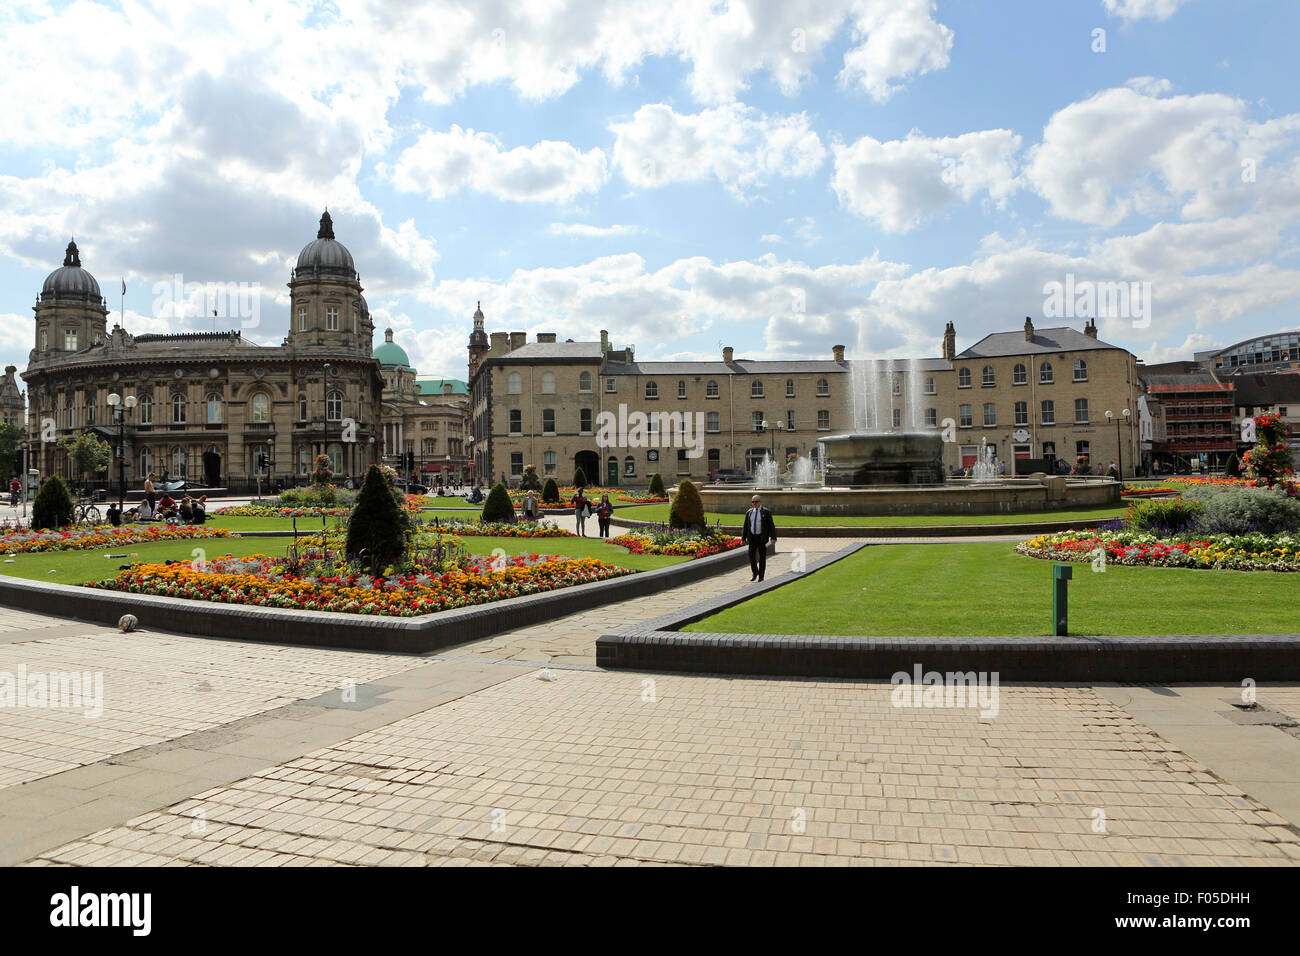 A section of Queen's Gardens by the Maritime Museum and Savile Street in Hull, England. The gardens are in the city centre. Stock Photo